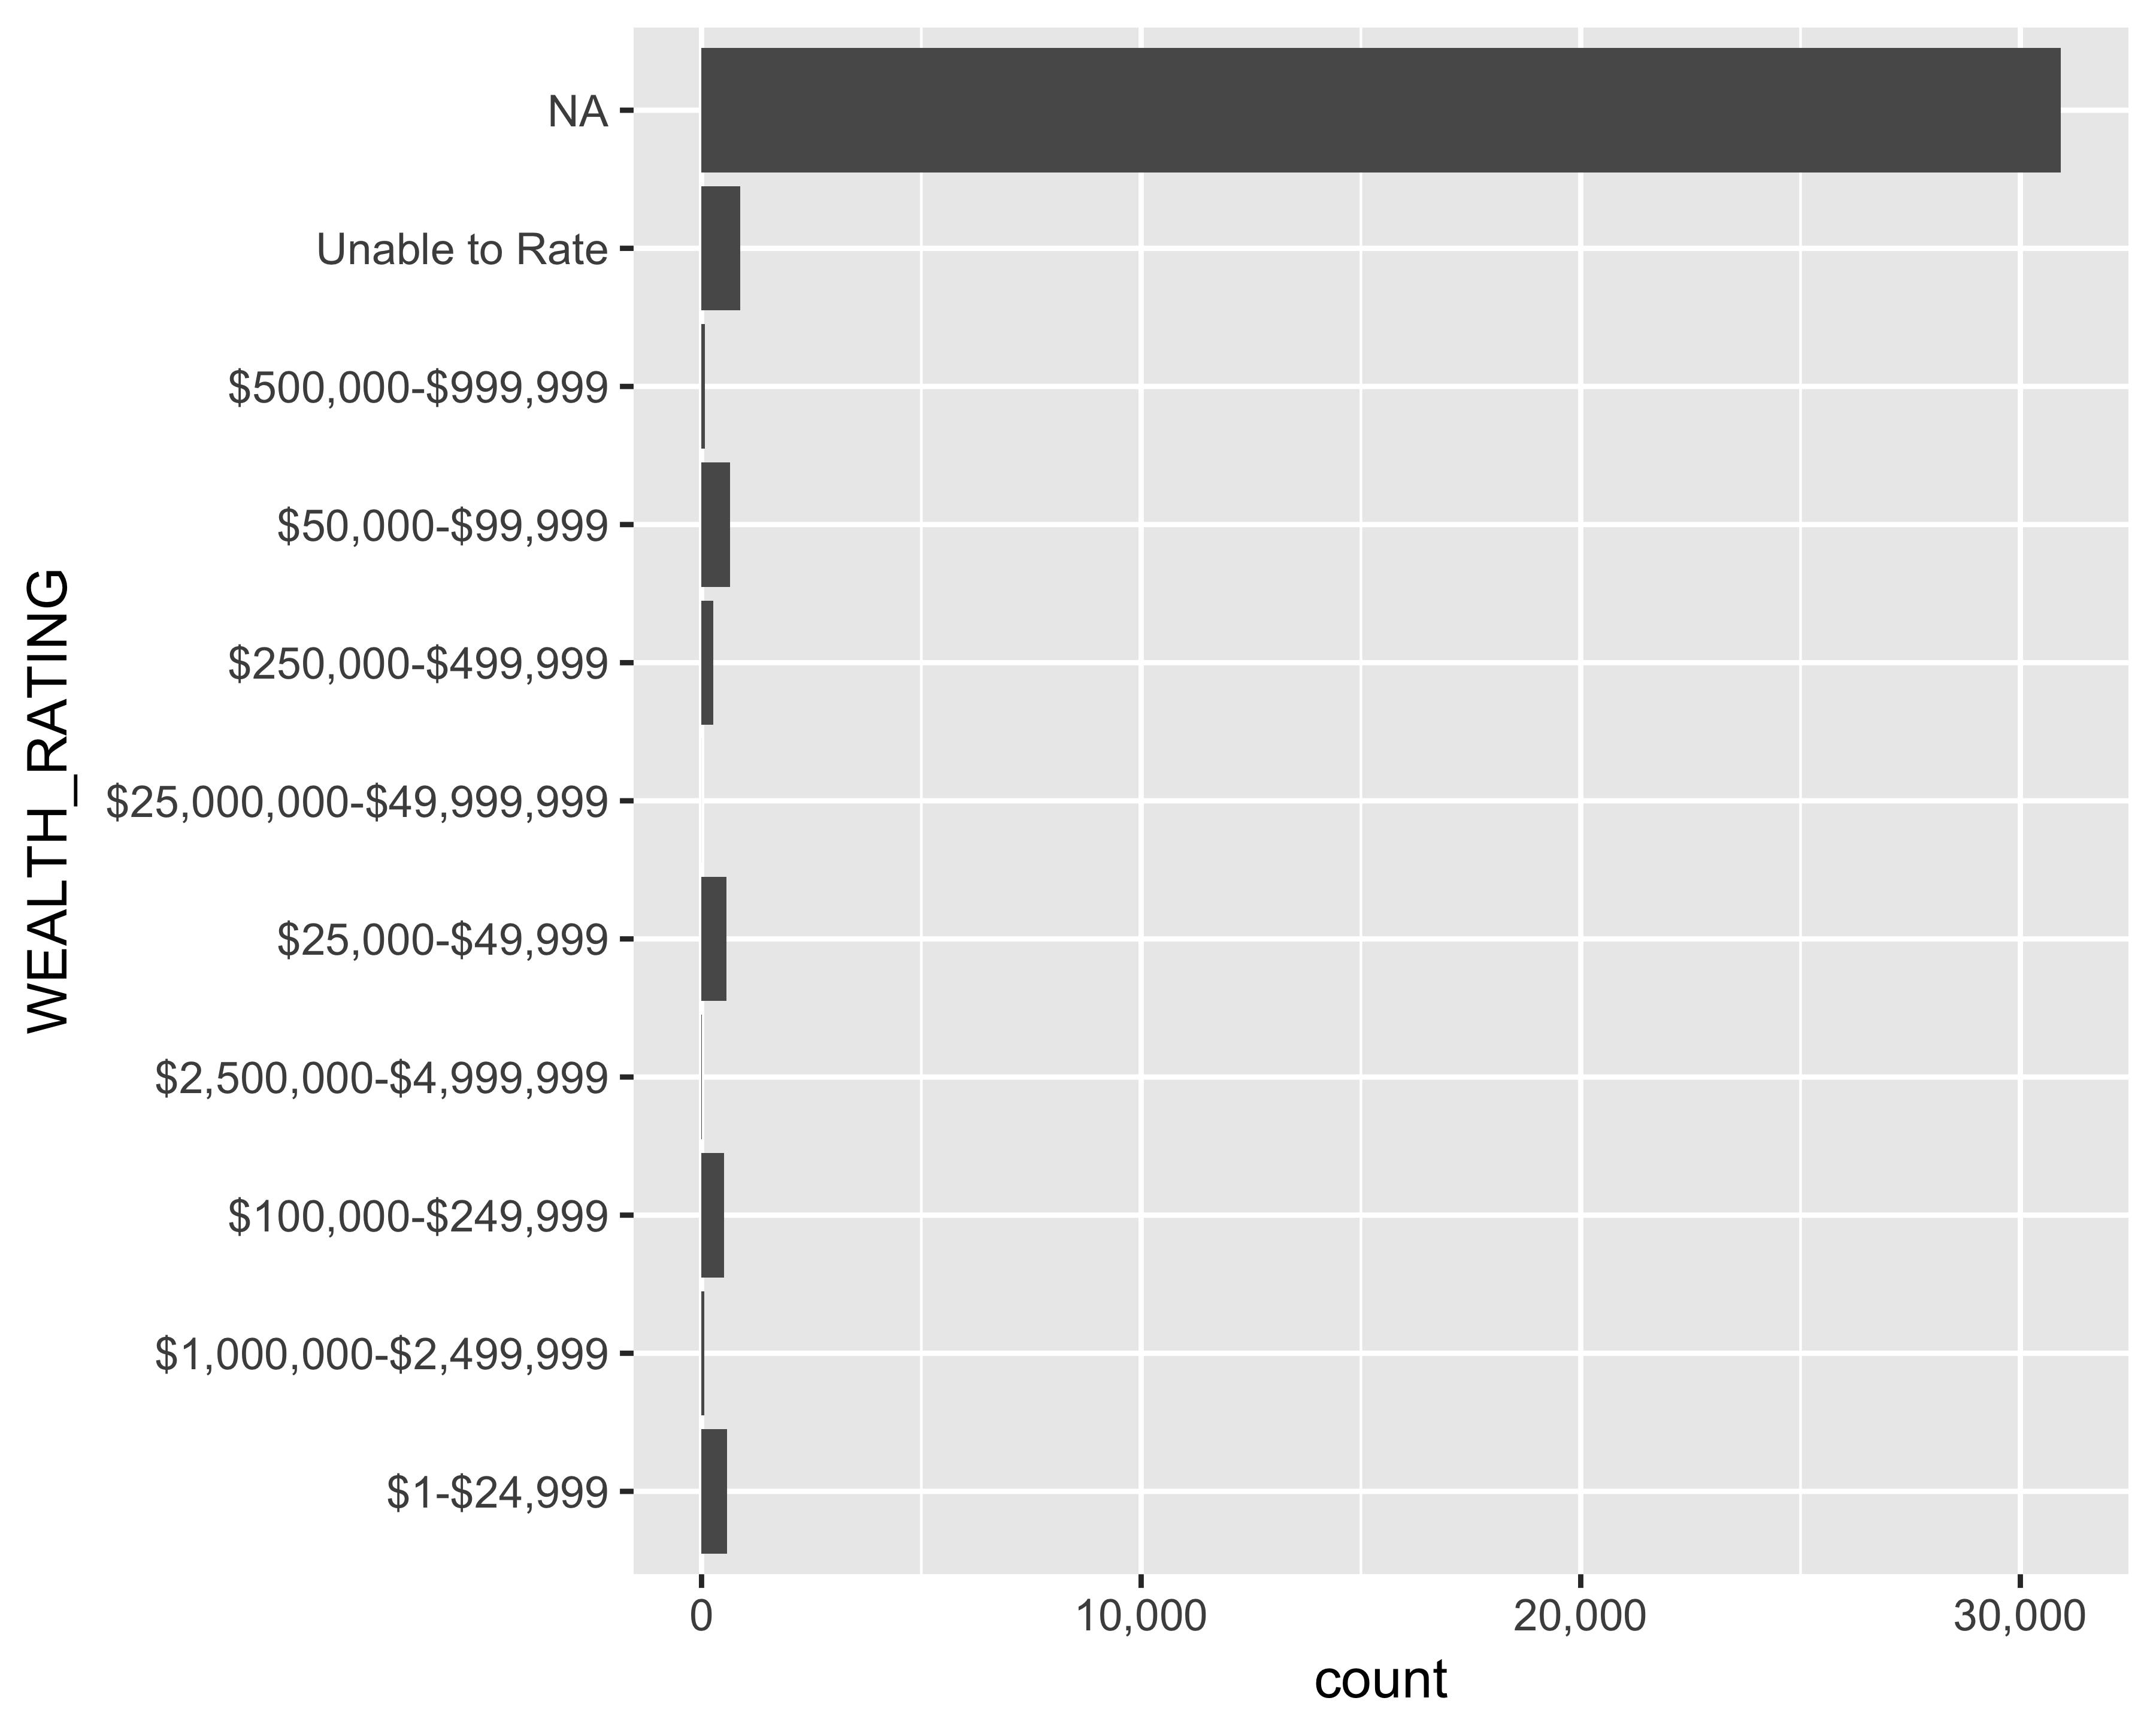 Horizontal bar graph of number of prospects by wealth ratings with commas